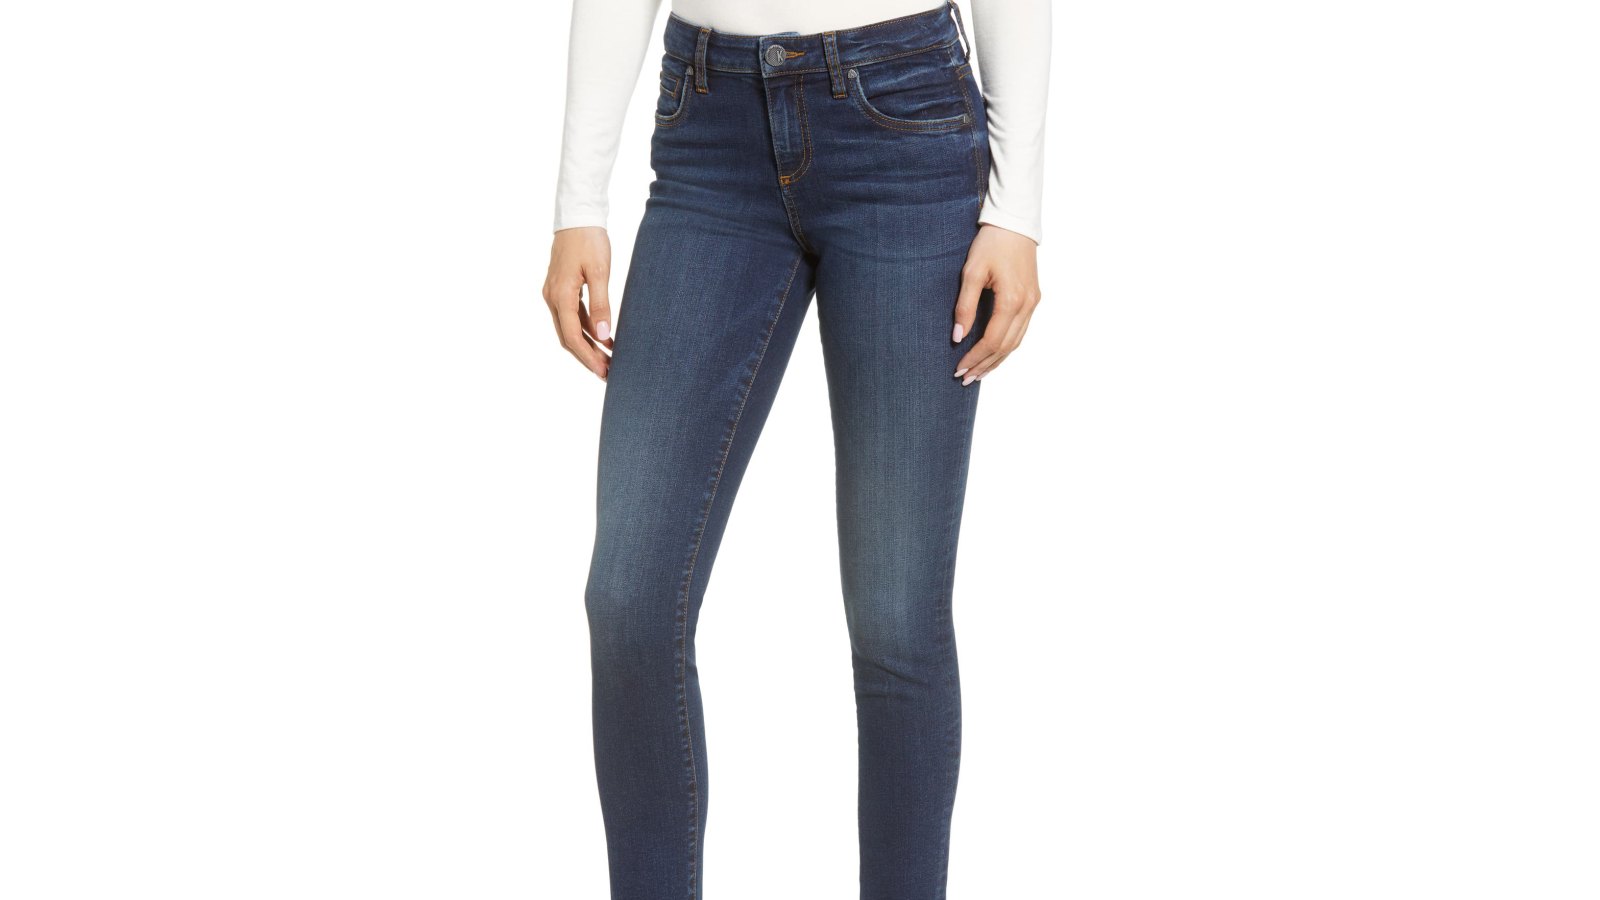 Kut From The Cloth Diana Skinny Jeans